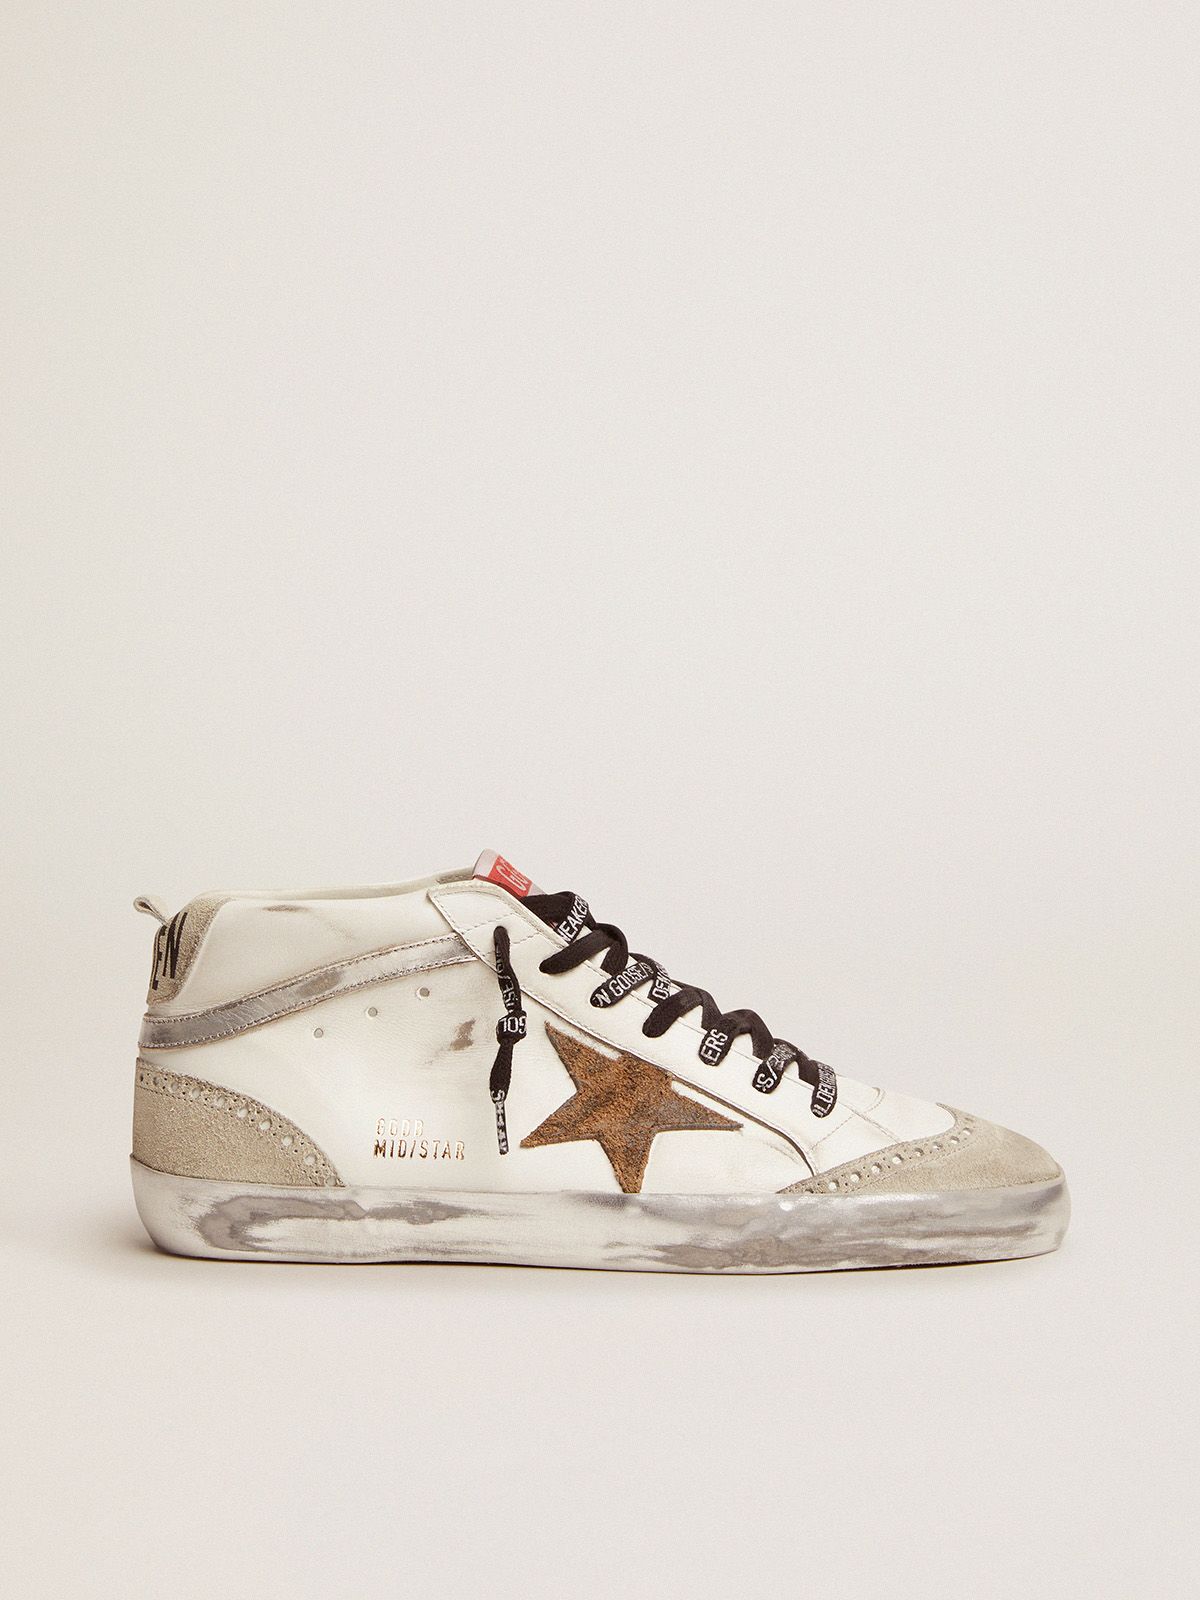 Mid Star sneakers with leopard-print suede star and silver laminated leather flash